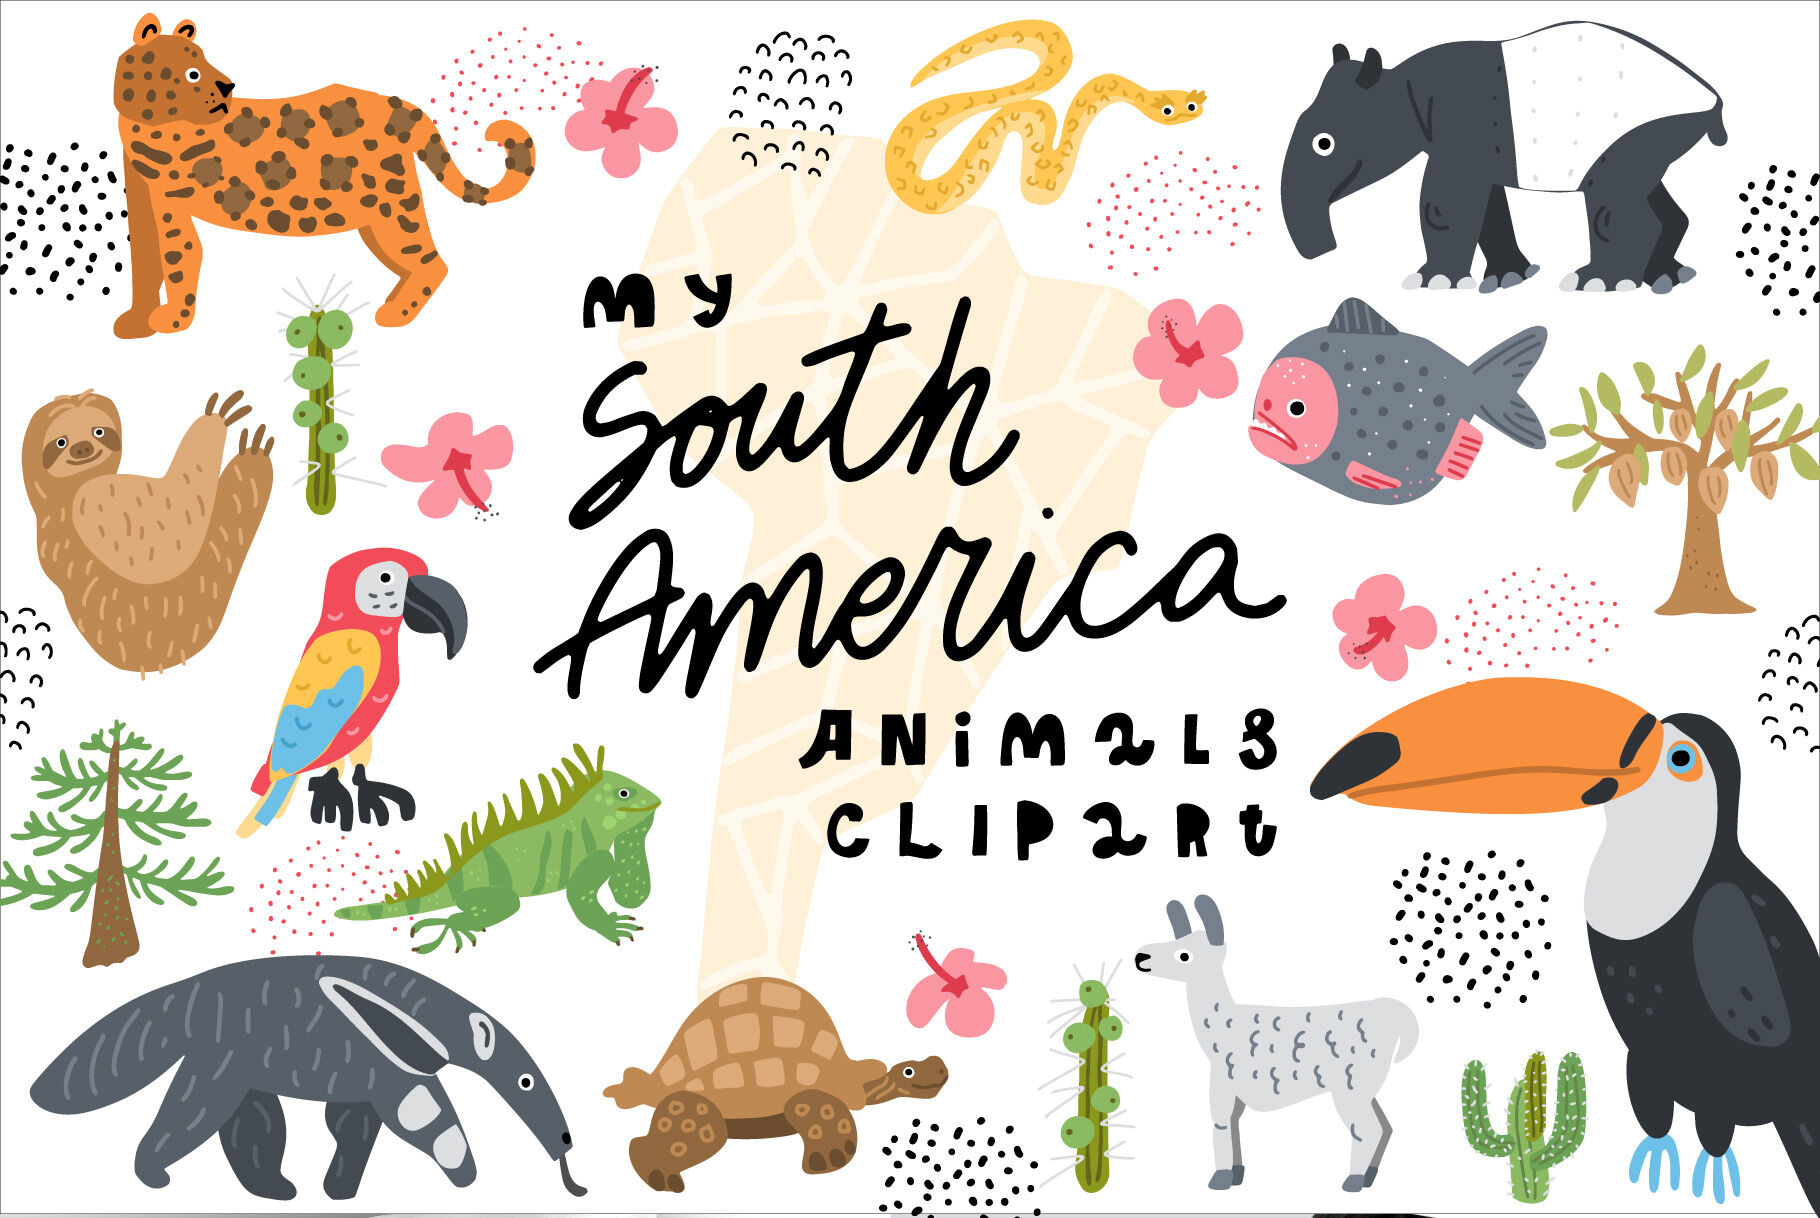 north america south america animals and birds - Clip Art Library